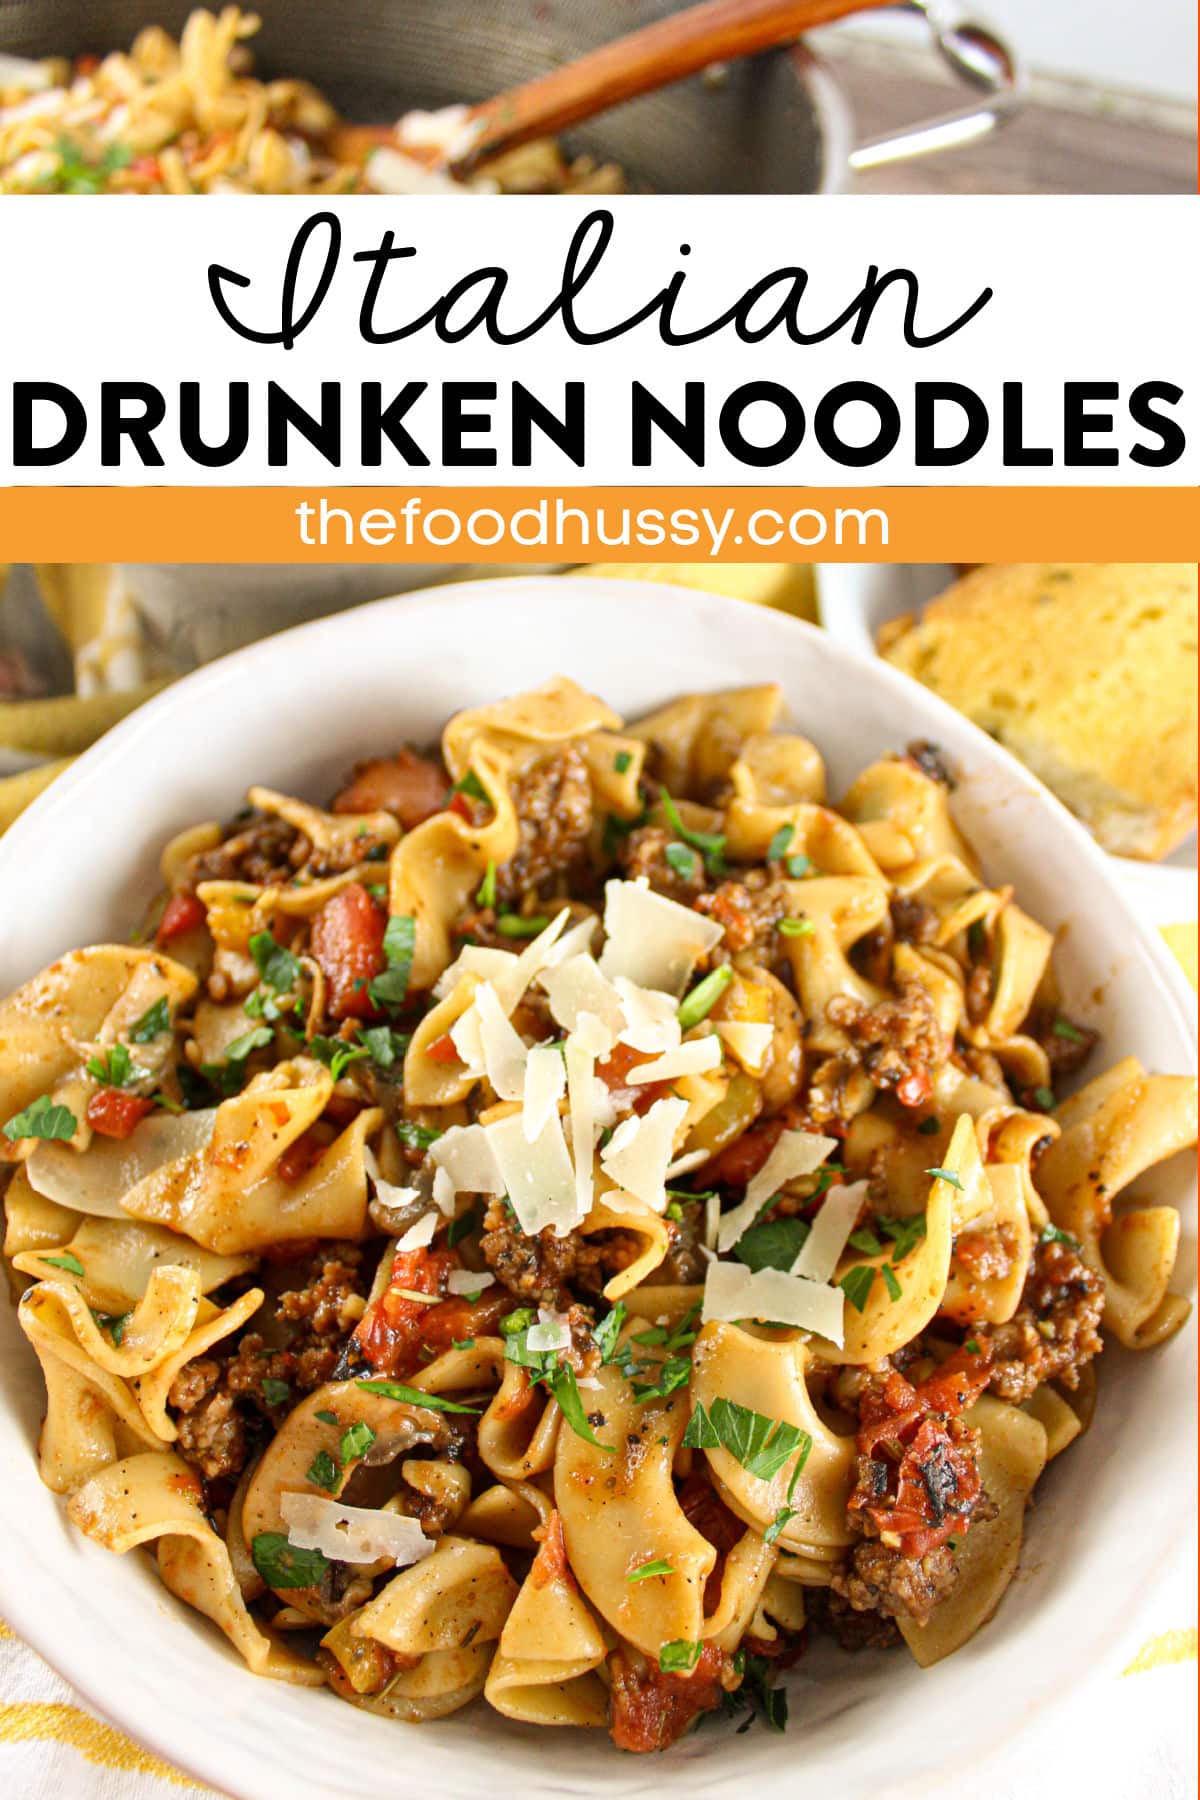 Italian Drunken Noodles are a light and easy weeknight dish featuring veggies and Italian sausage with a touch of white wine. You'll have this dish on the table in just 15 minutes! via @foodhussy